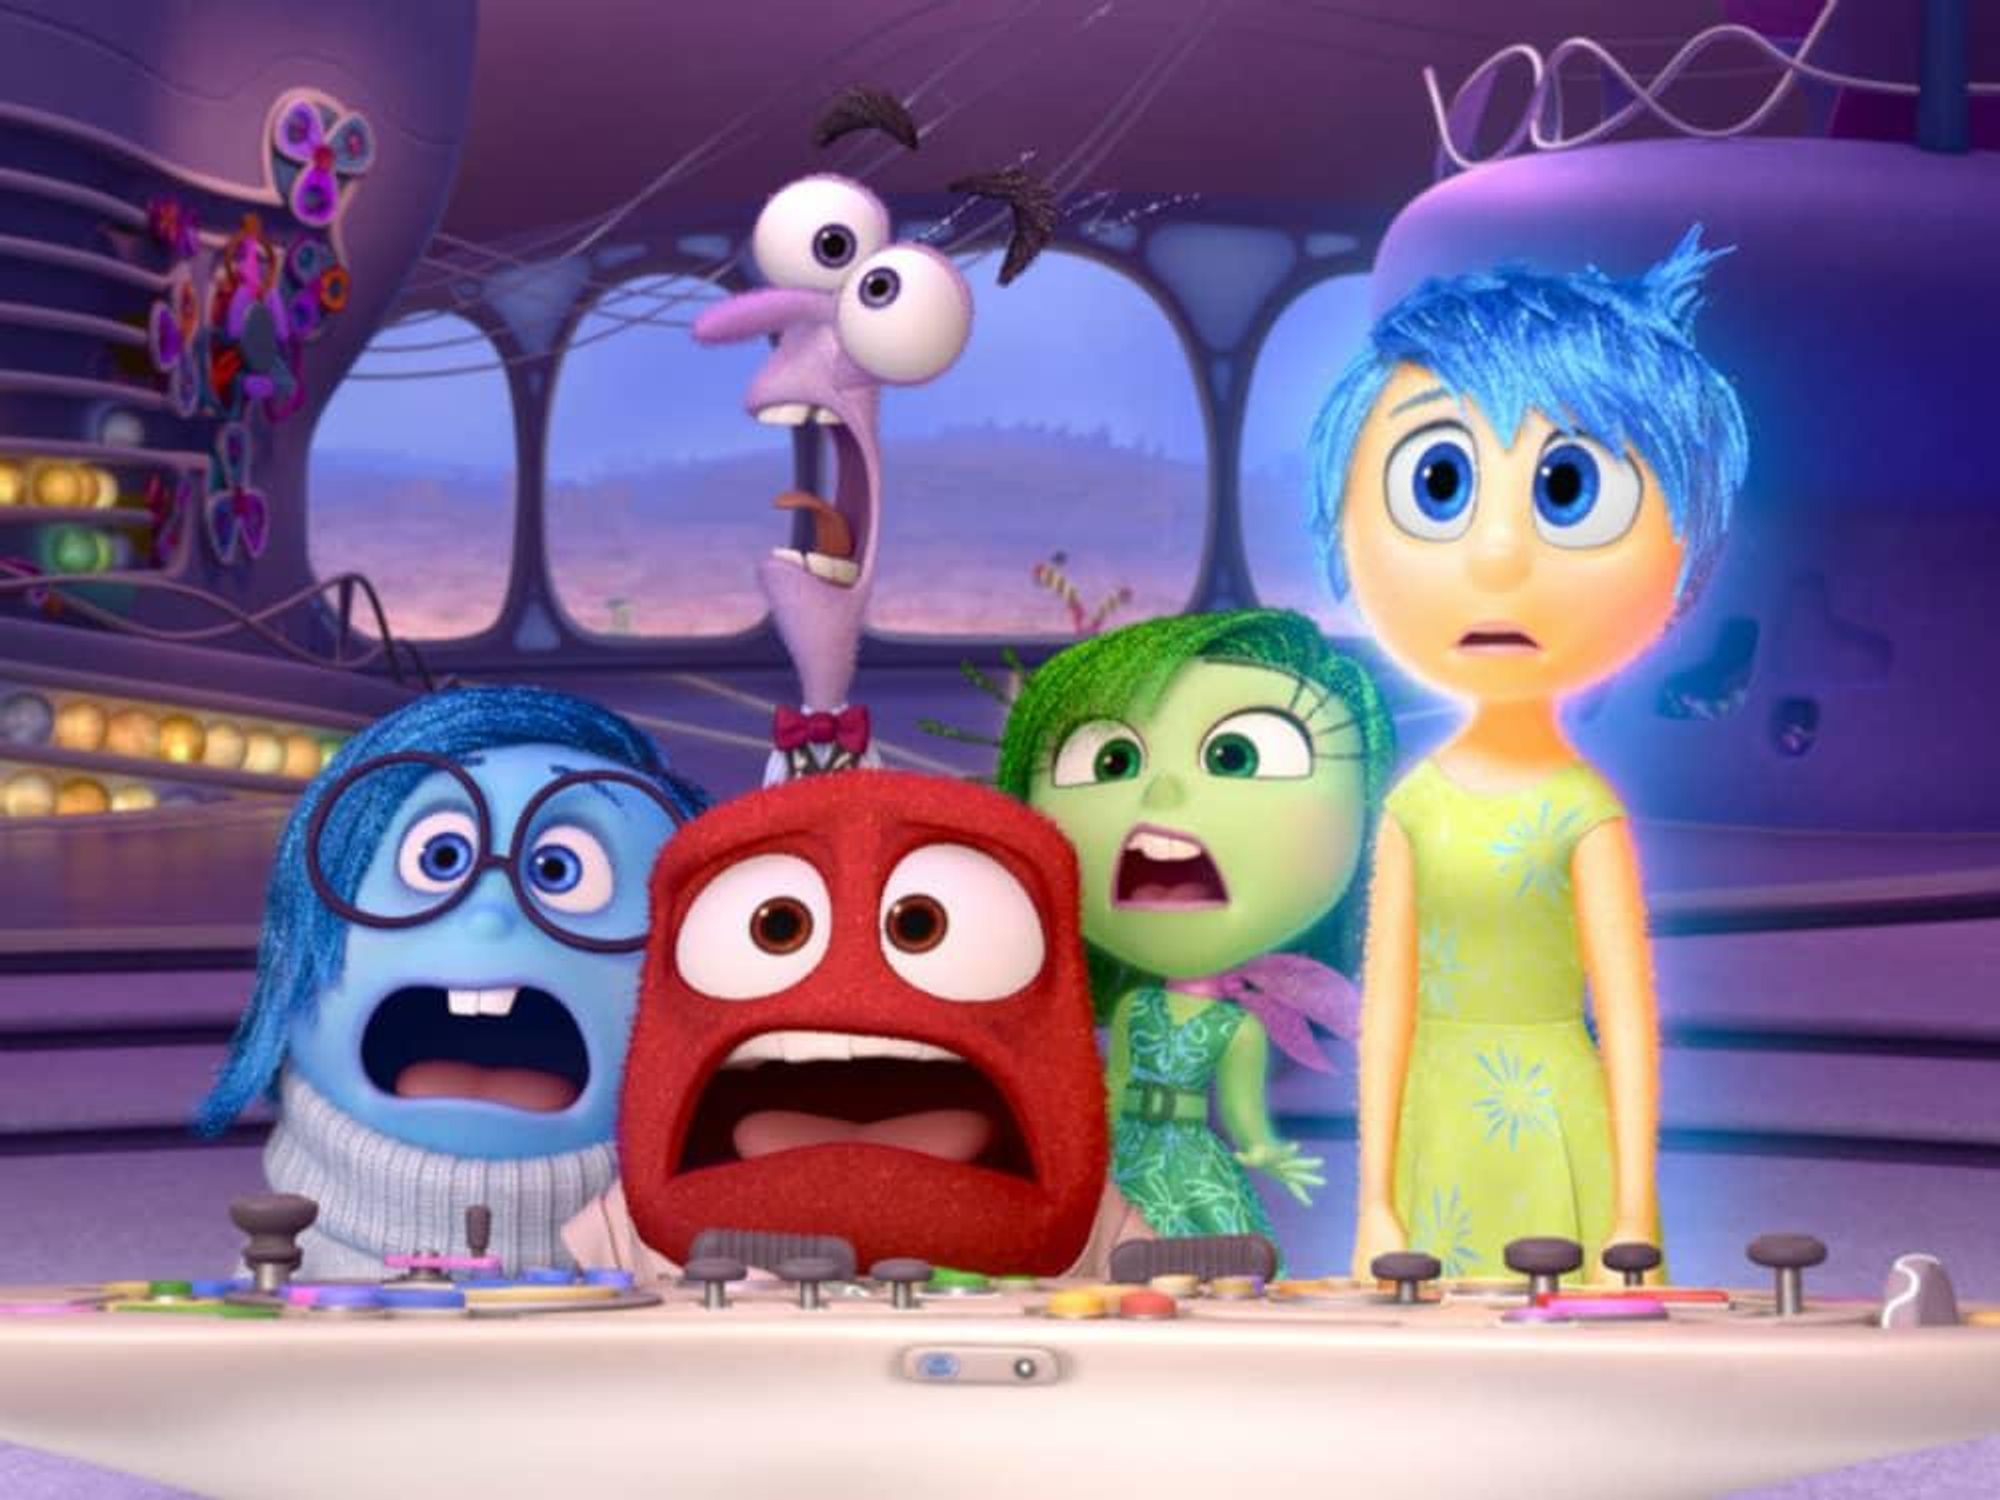 Scene from Inside Out